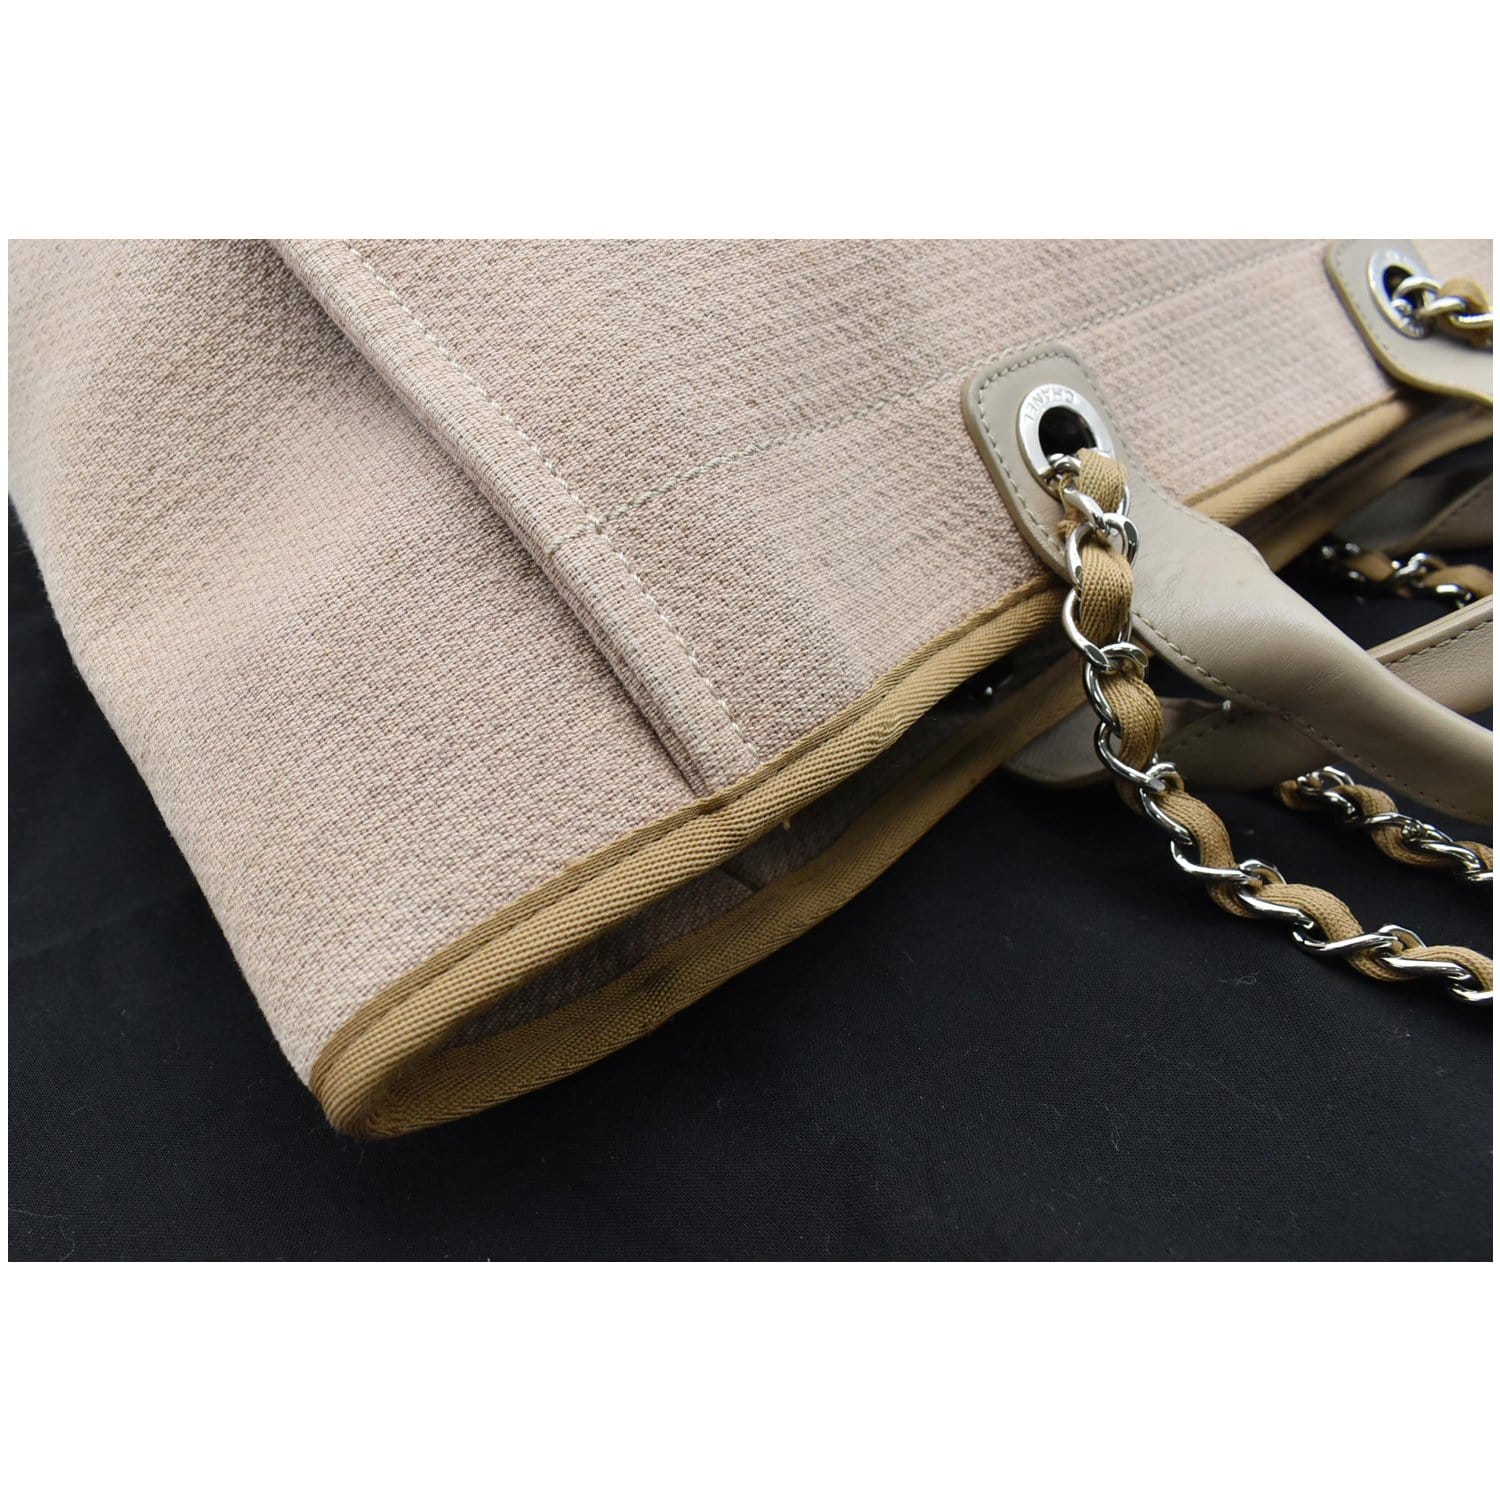 CHANEL Deauville Large Canvas Tote Bag Beige